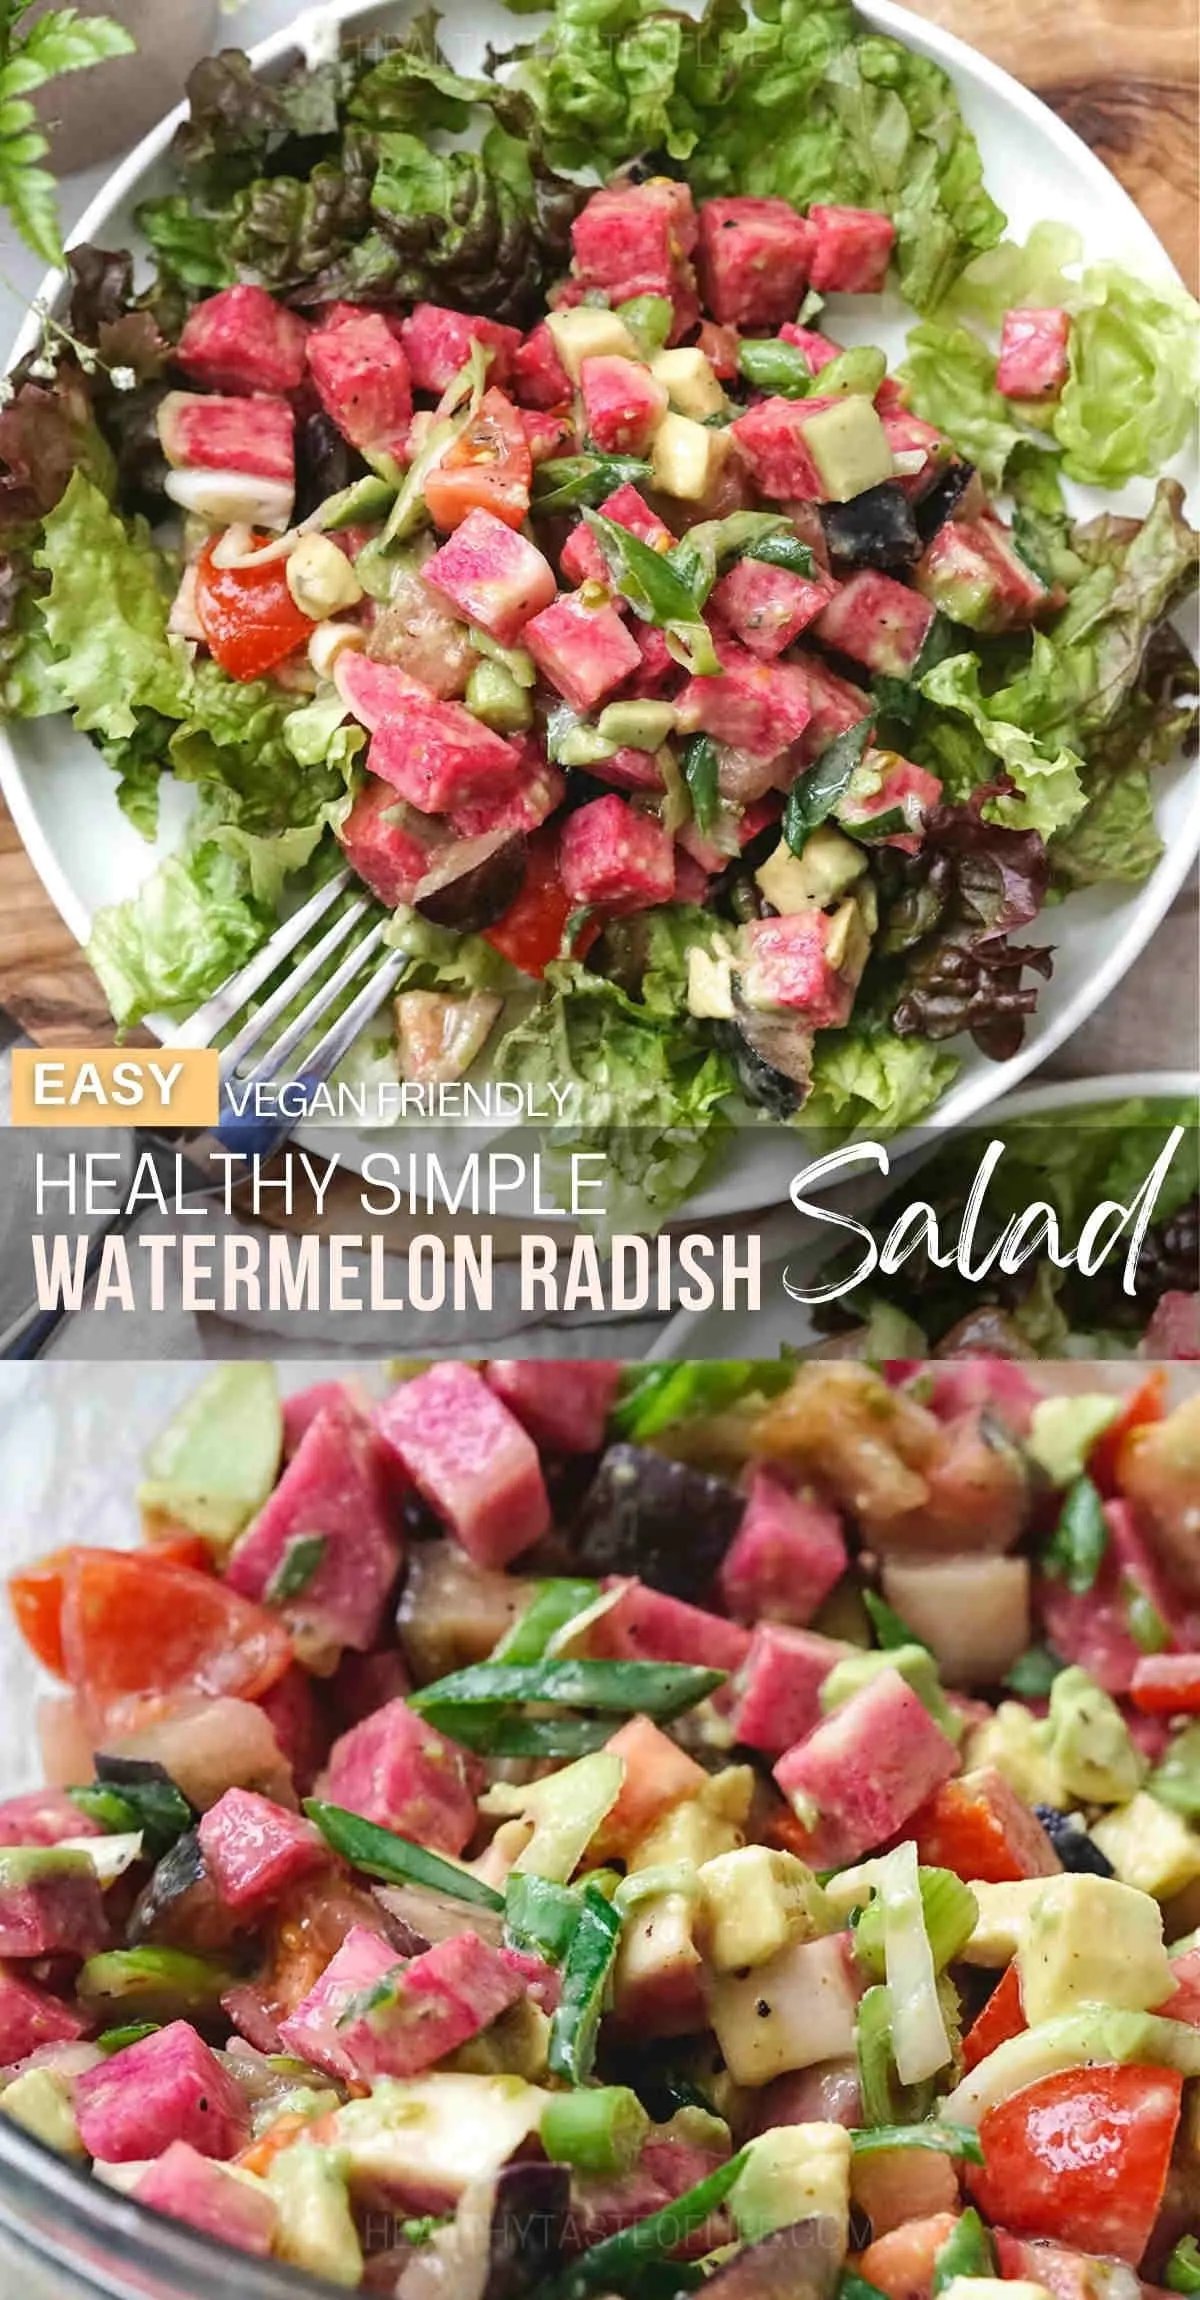 A fresh and colorful side dish to welcome spring:  watermelon radish salad with juicy tomatoes, creamy avocado, and refreshing watermelon radishes - a burst of vibrant flavors and colors. And don't forget the zesty lemon honey vinaigrette that brings everything together in a sweet and tangy goodness. This watermelon radish salad recipe is perfect for a light lunch or as a nutritious addition to any meal. #watermelonradish #salad #recipe #spring #summer #healthy #radishsalad